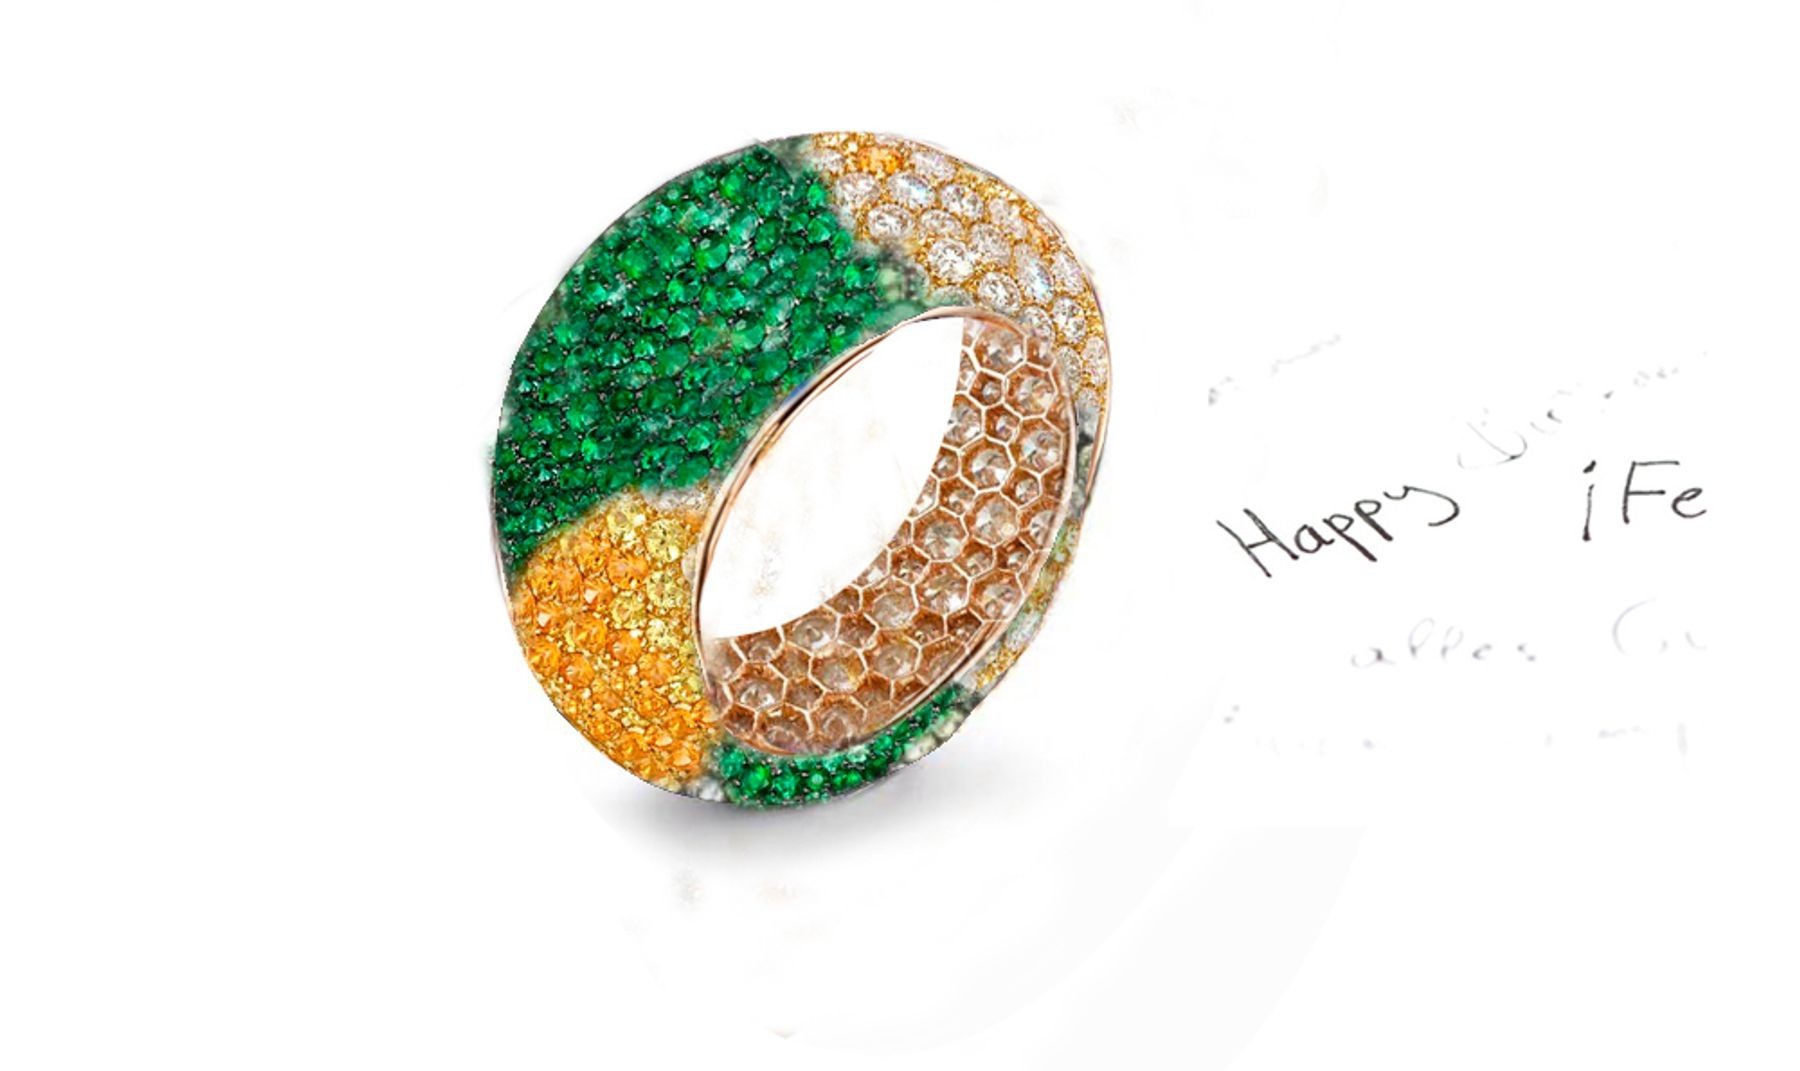 A Beautiful Collection of Eternity Rings Featuring Diamonds & Rubies, Emeralds & Sapphires